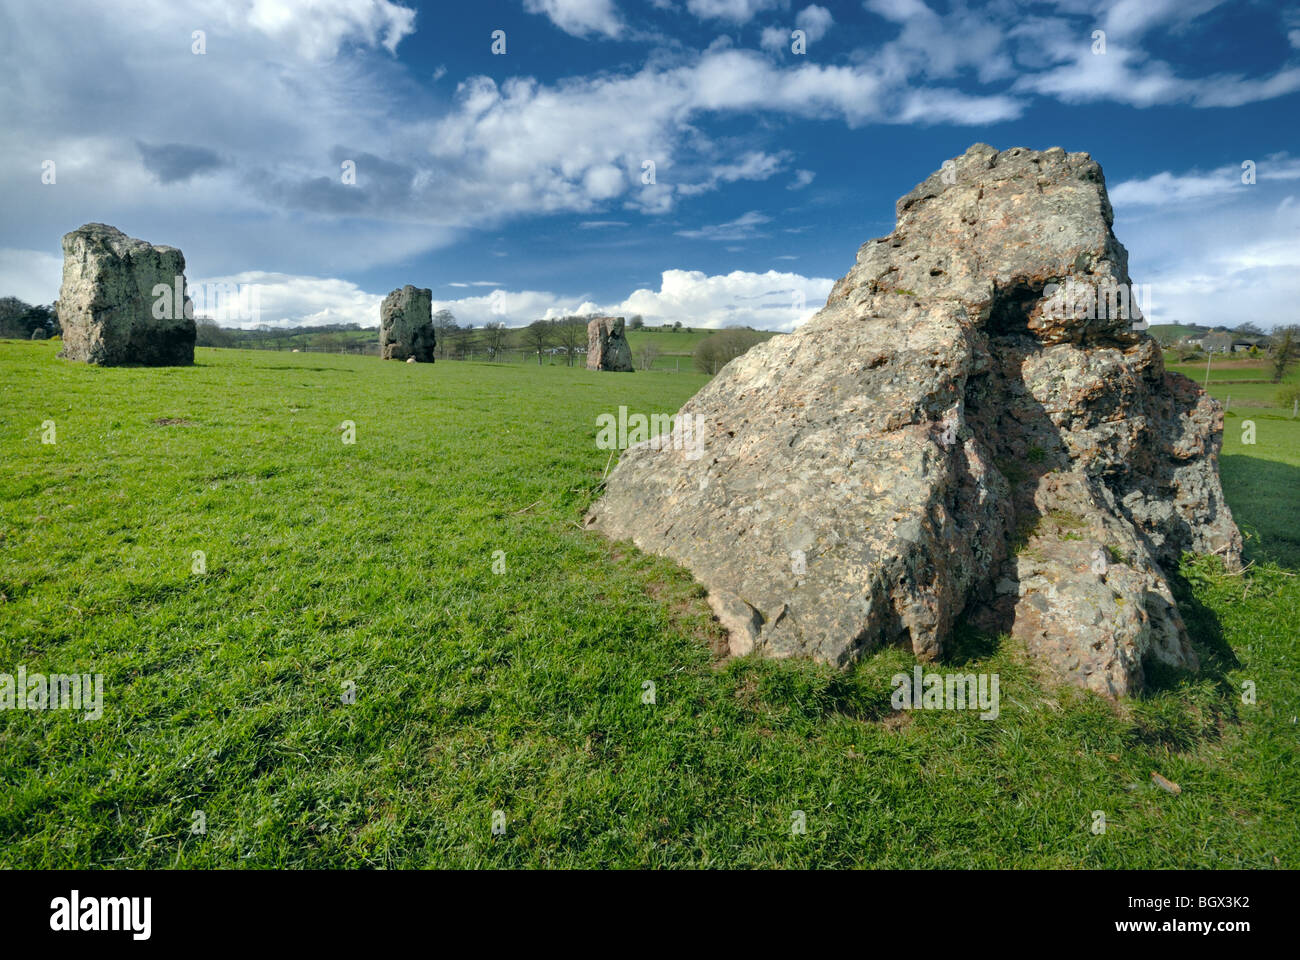 Ancient monolithic standing stones in Stanton Drew, Somerset on a sunny day. Stock Photo